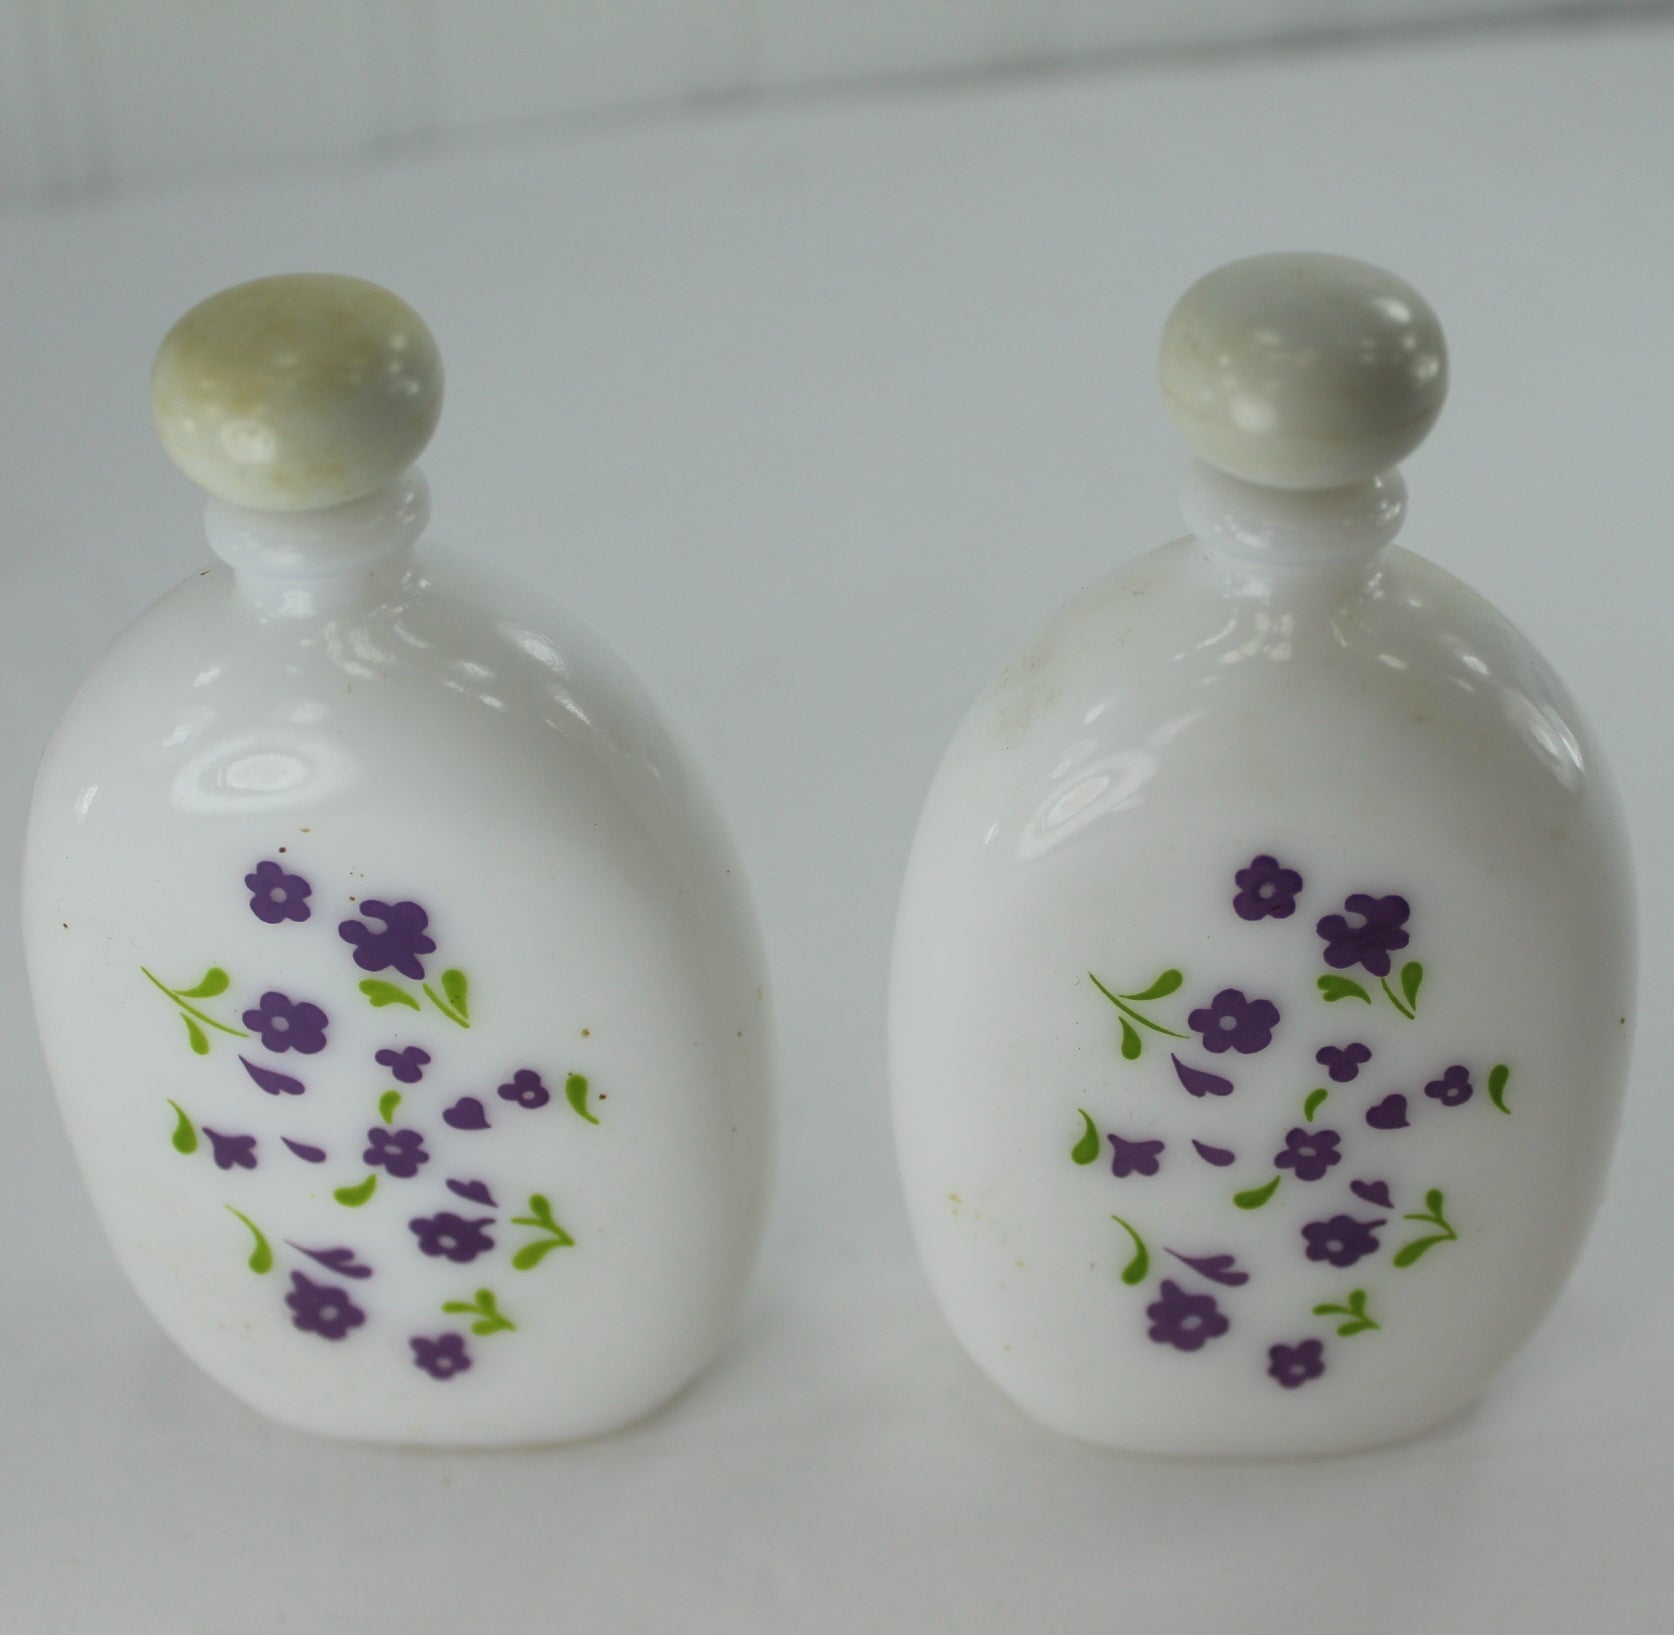 Avon Vintage Vanity Collectibles Milk Glass Hand 2 Painted Violet Perfume Bottles jewelry trinket tray